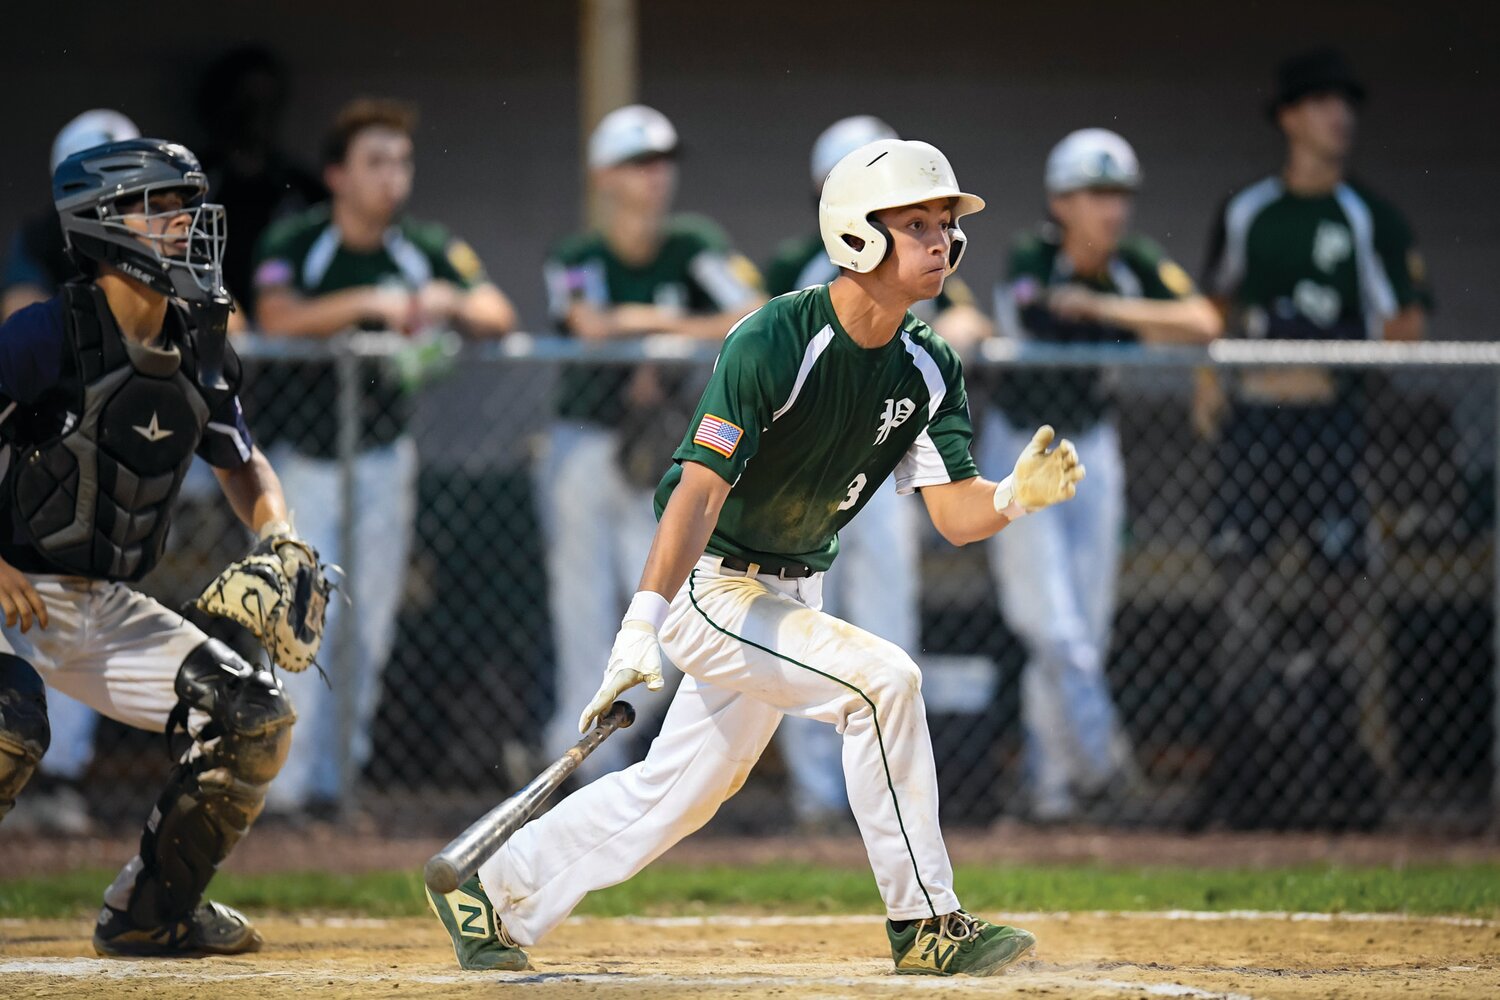 Pennridge’s Alex Fantaskey watches his sacrifice fly to right field to make it 4-1 in the bottom of the third inning.